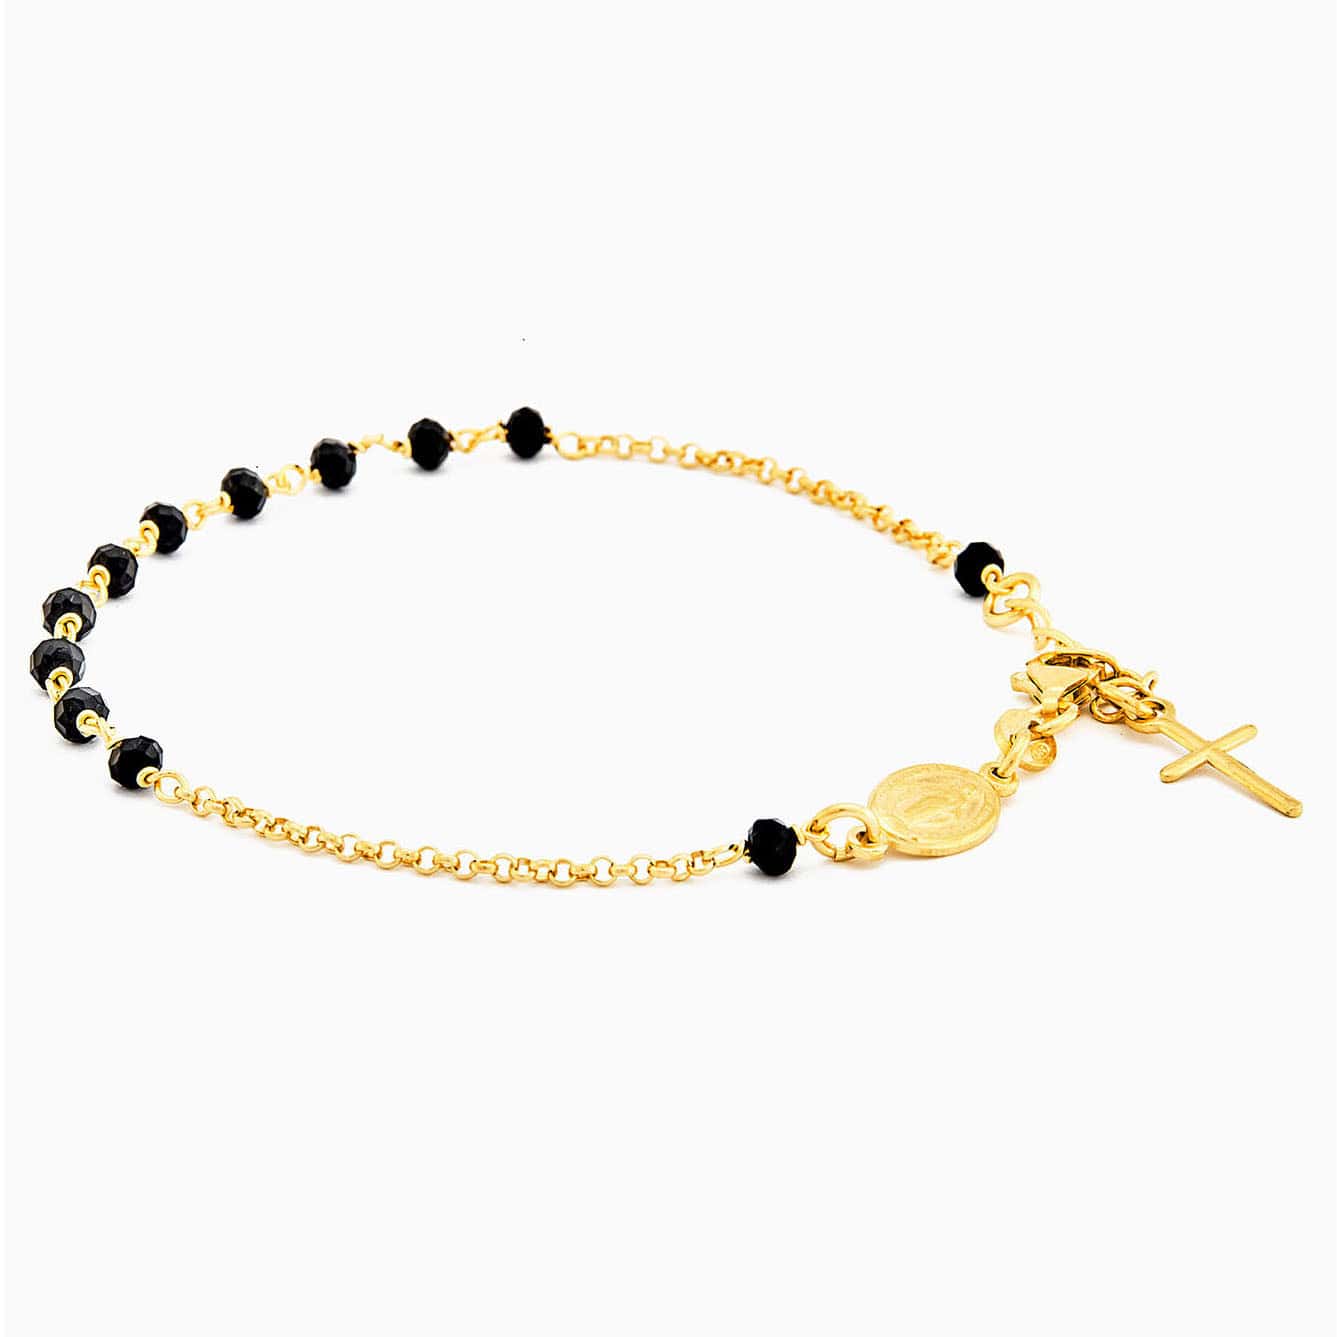 MONDO CATTOLICO Prayer Beads Gold e Black Beads / Cm 17.5 (6.9 in) STERLING SILVER ROSARY BRACELET WITH MIRACULOUS MEDAL AND CROSS FACETED BEADS